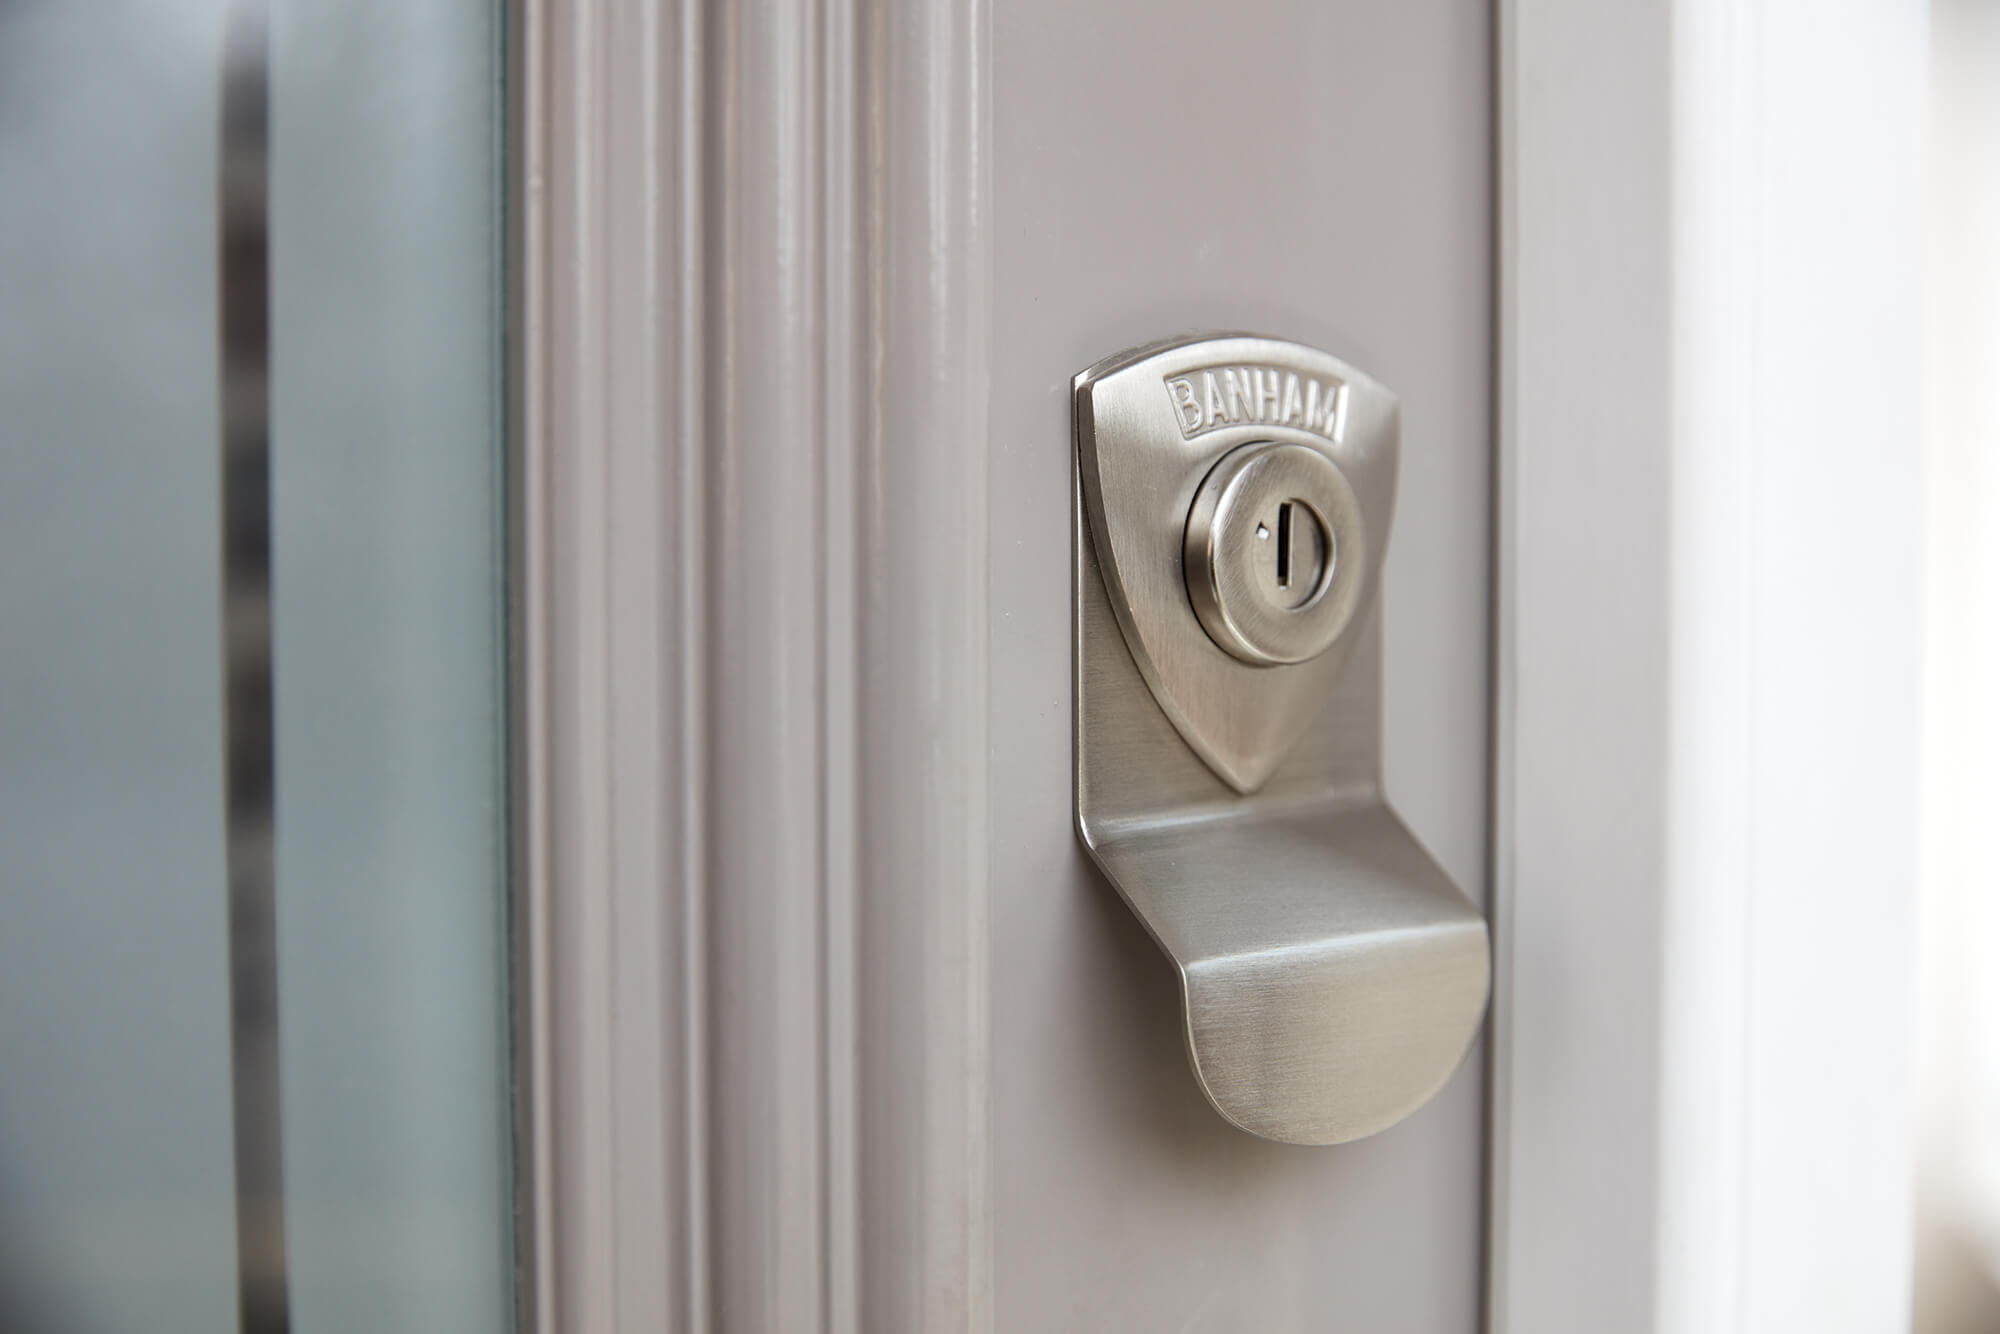 Locking systems of the highest quality.